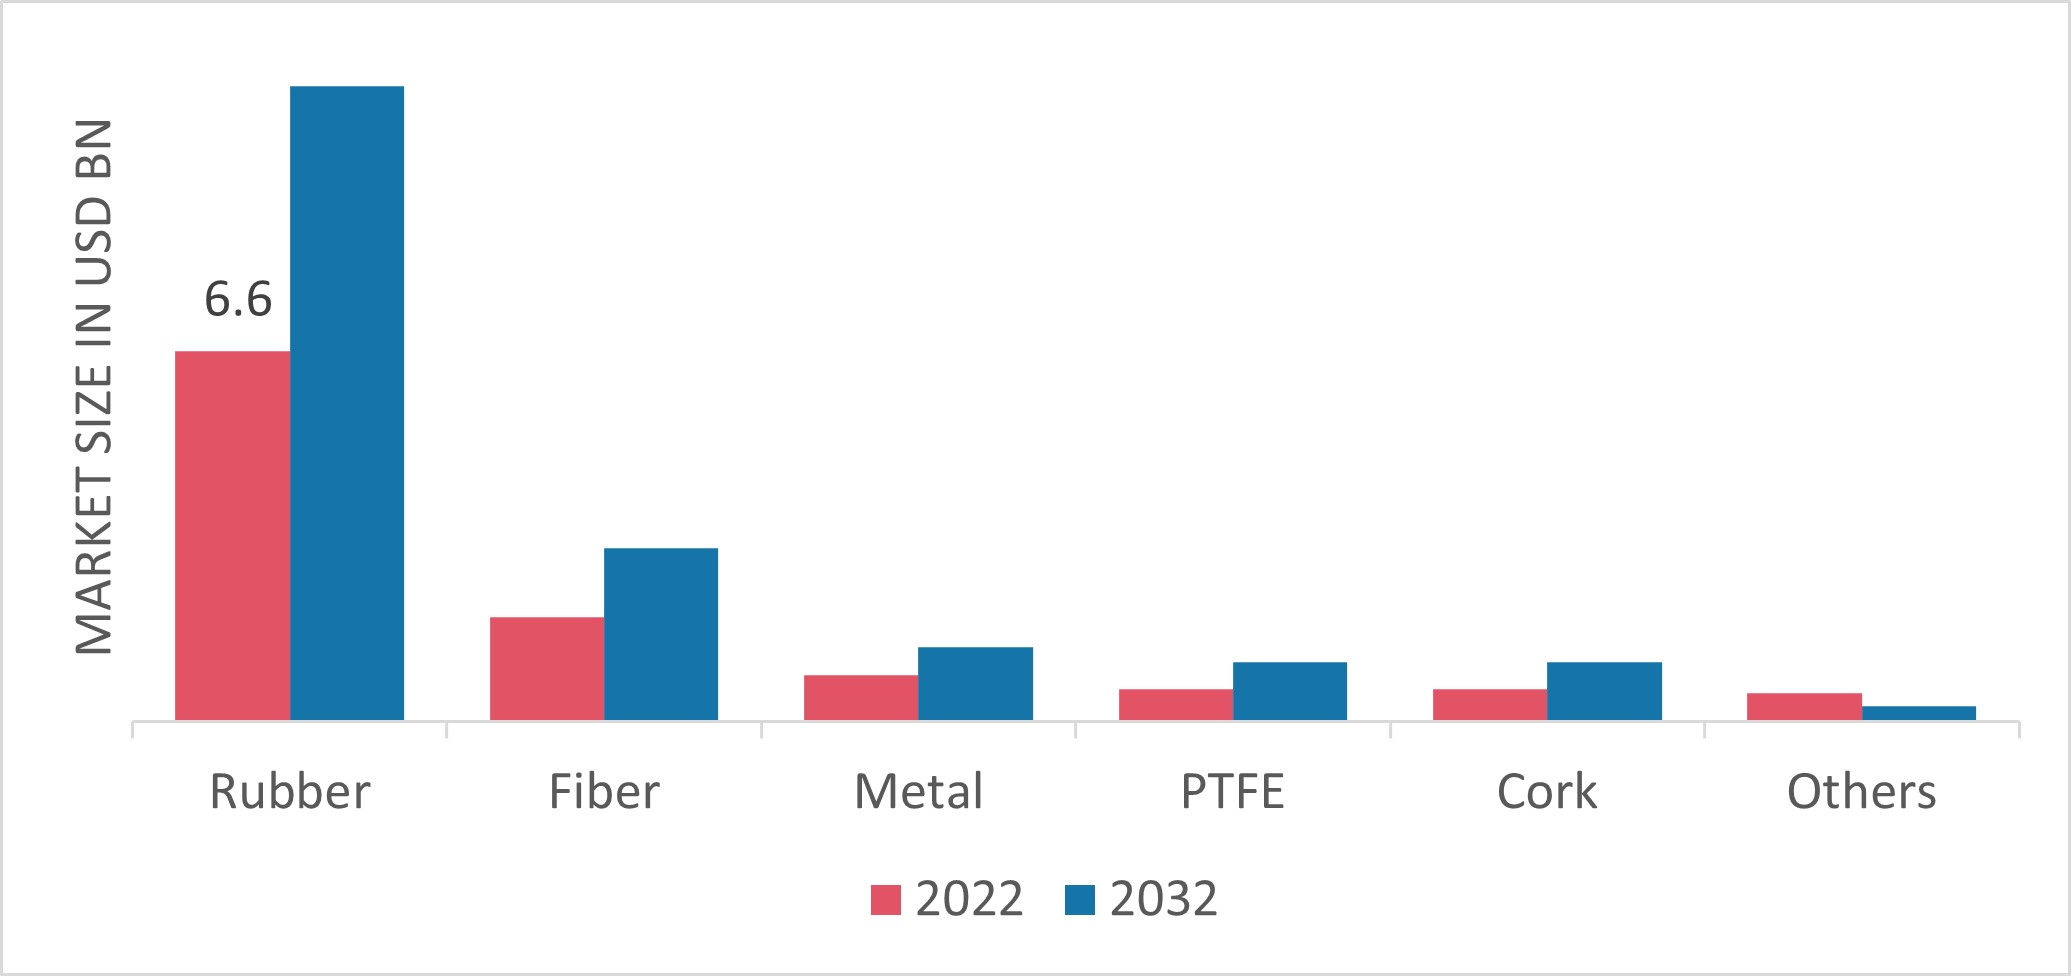 Gasket & Seal Materials Market, by Material, 2022 & 2032